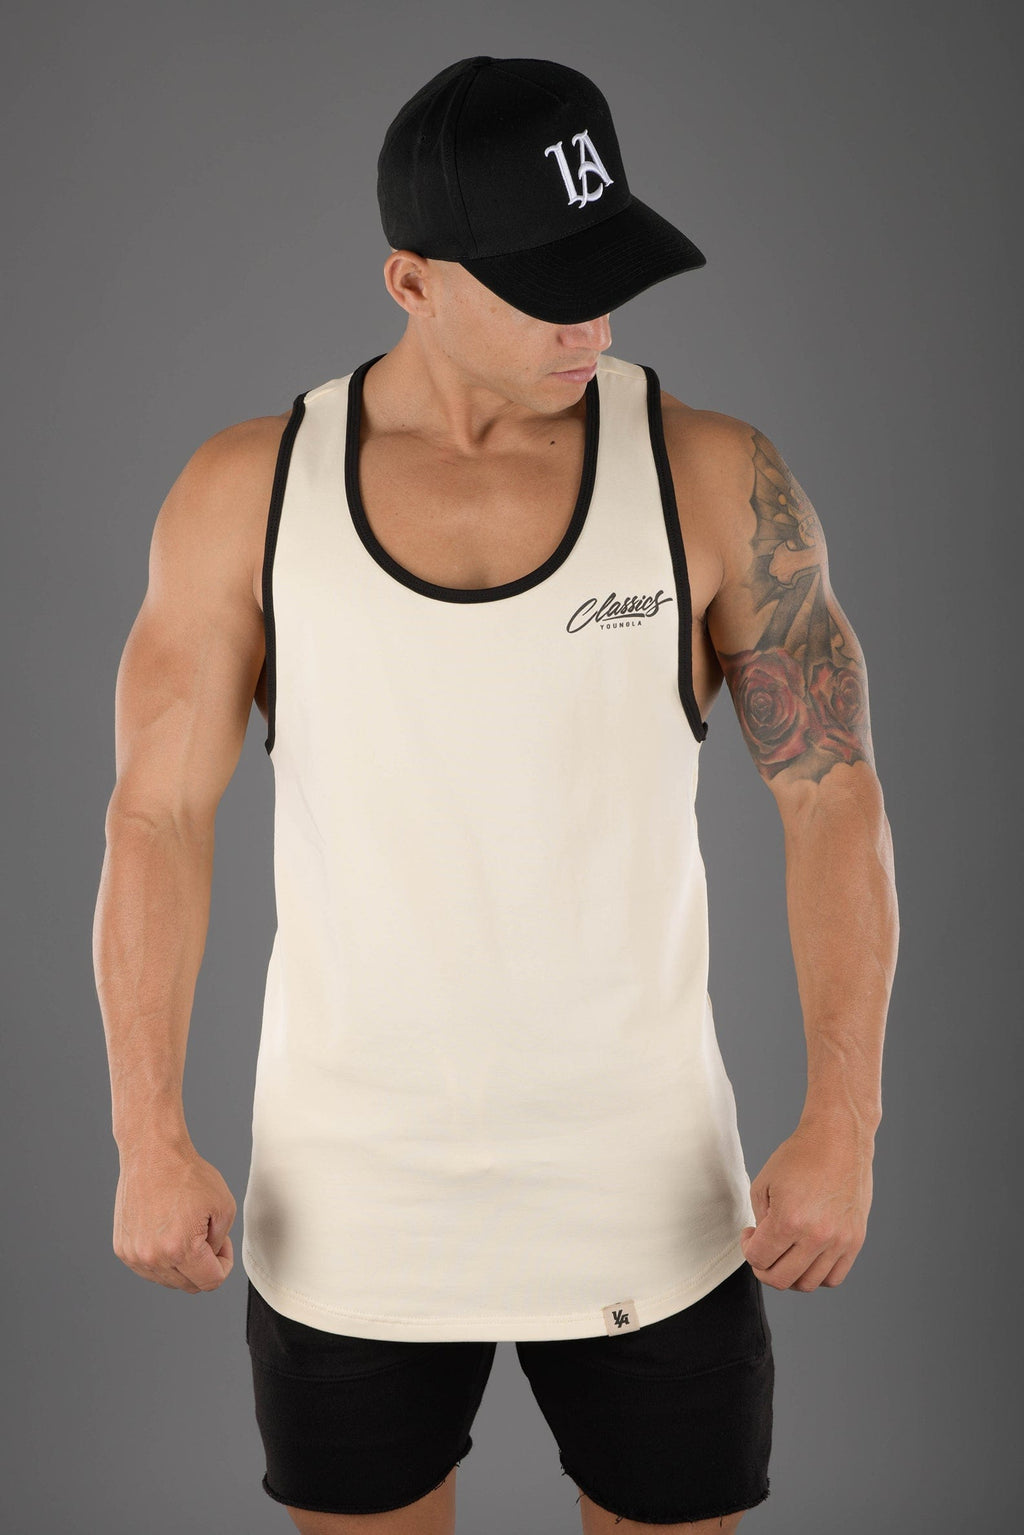 YoungLA Stringer Tank Tops for Men, Workout Muscle Y Back, Gym  Bodybuilding Clothing